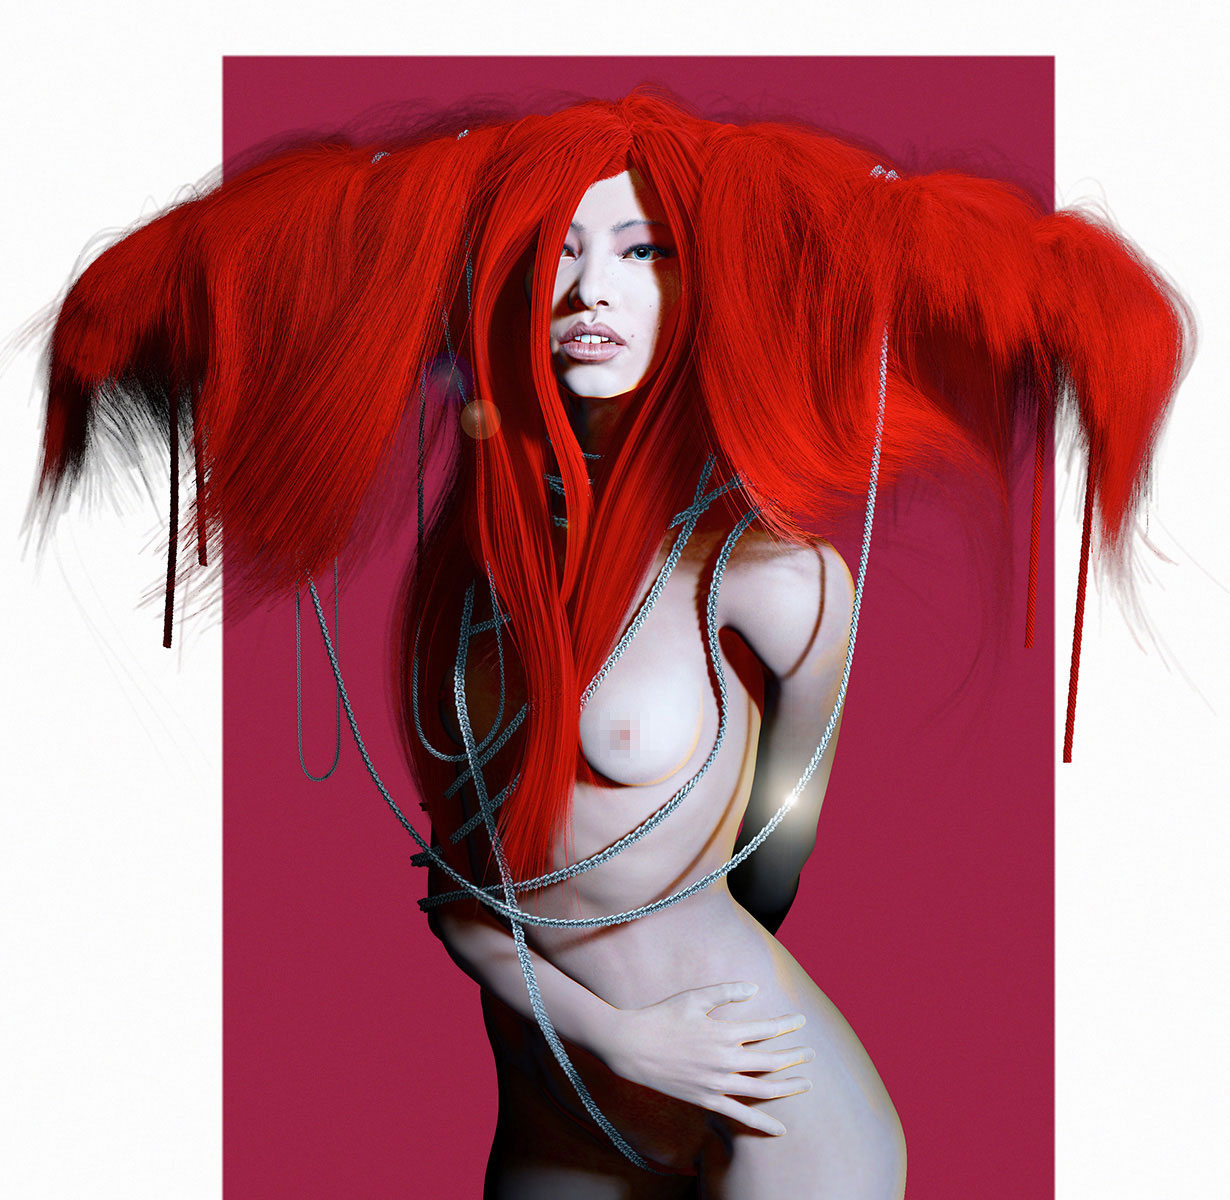 Fine Art: Lady In (Crazy) Red (Hair) [NSFW]